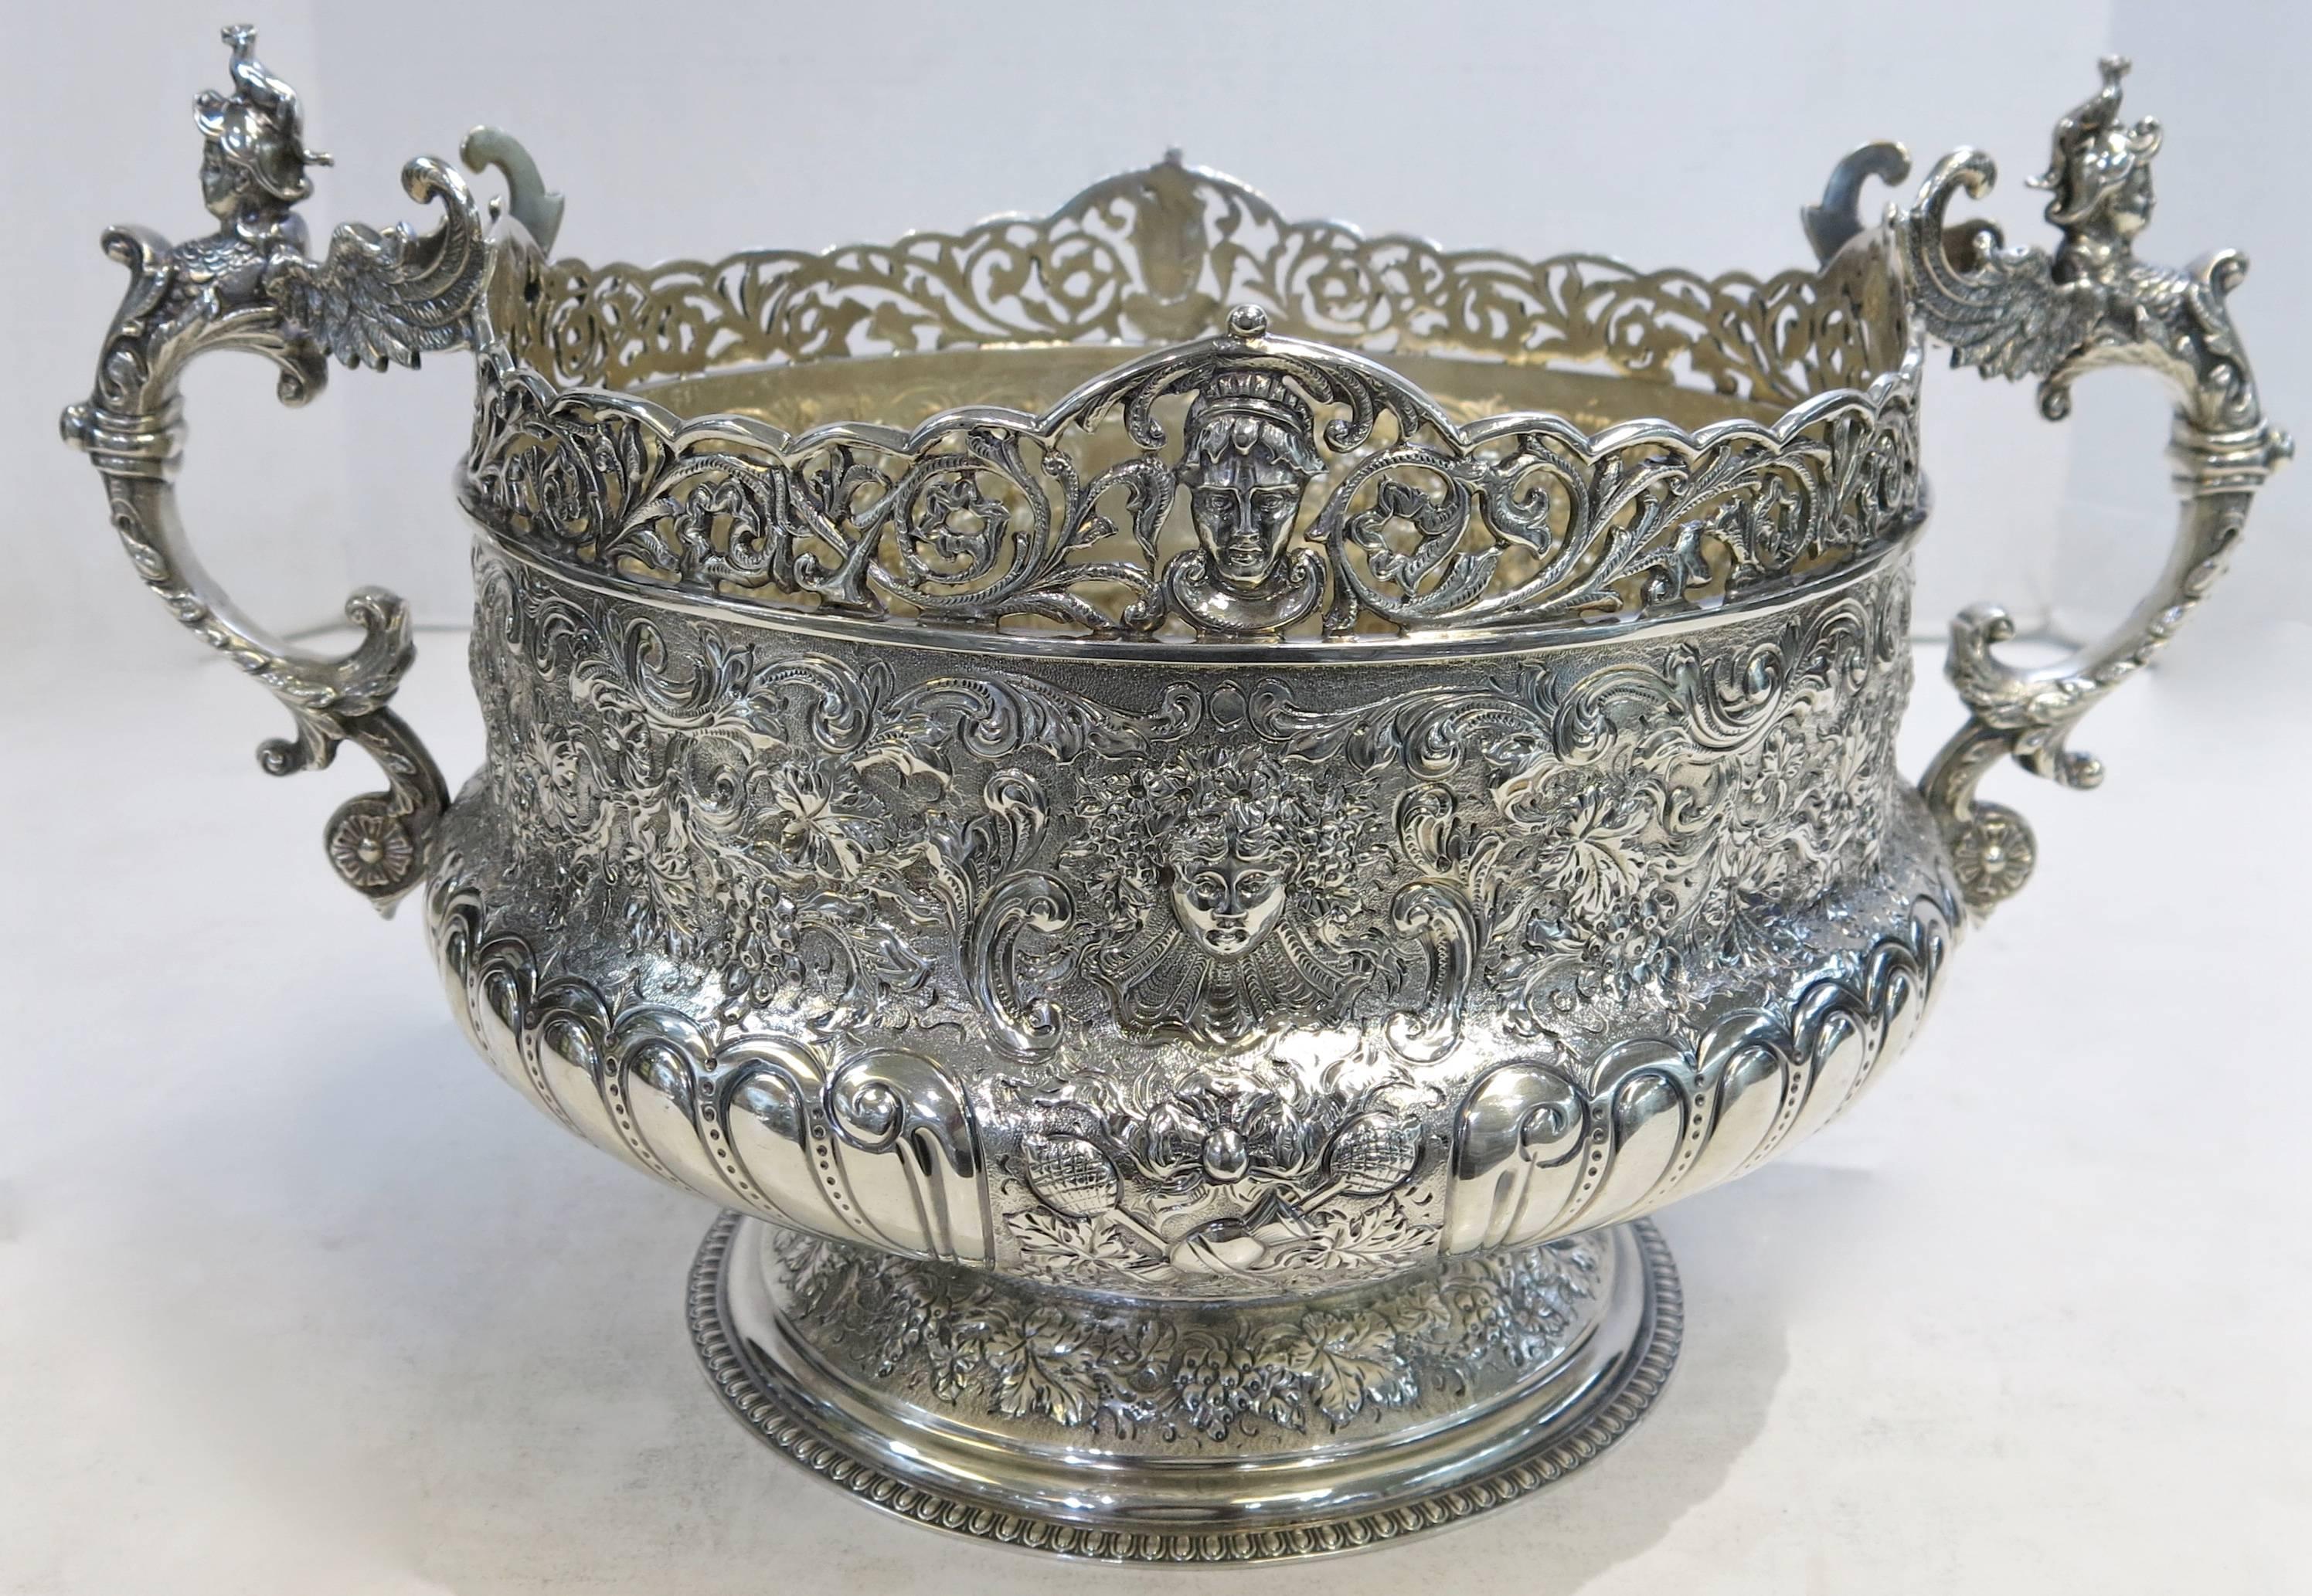 An exceptional quality, antique English, Victorian, sterling silver two handled bowl. The entire body is beautifully hand chased with the exception of a blank cartouche on one side. The round pedestal foot is hand chased to match, and the cast